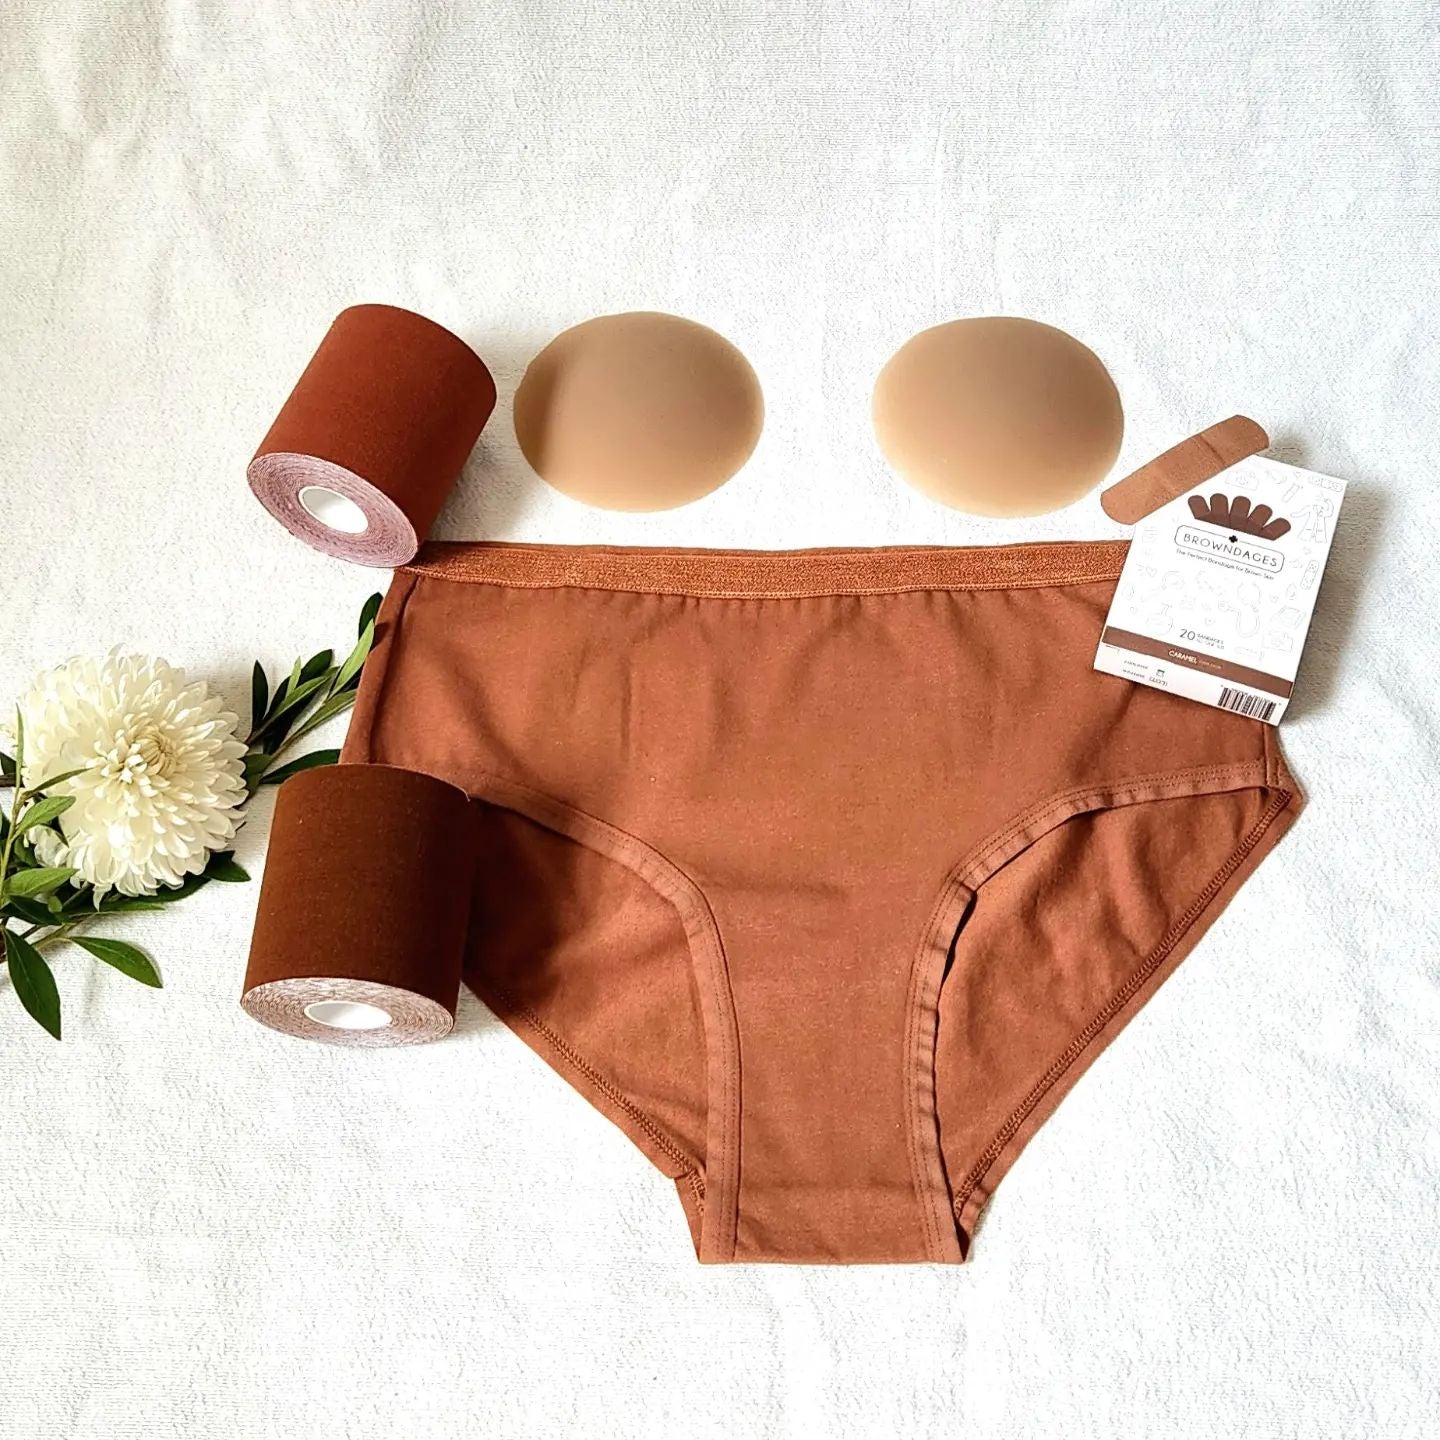 Medium brown panties bundled with matching boob tape, bandages, and reusable nipple covers for brown skin.